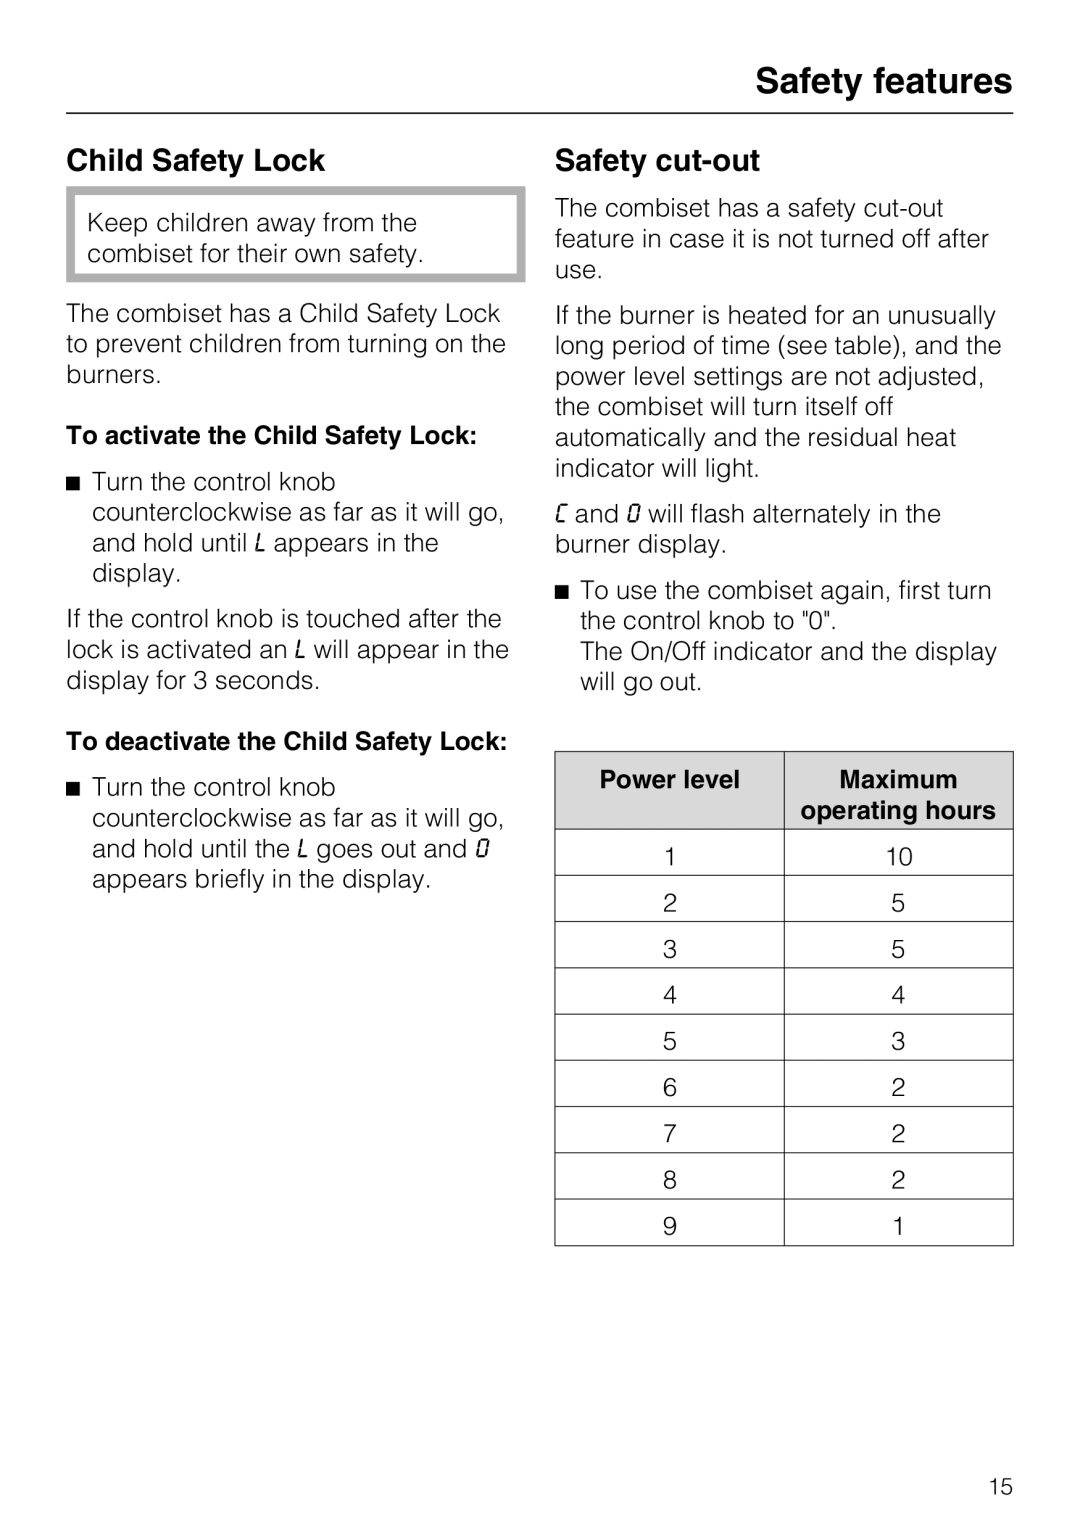 Miele CS 1223 installation instructions Safety features, Child Safety Lock, Safety cut-out 